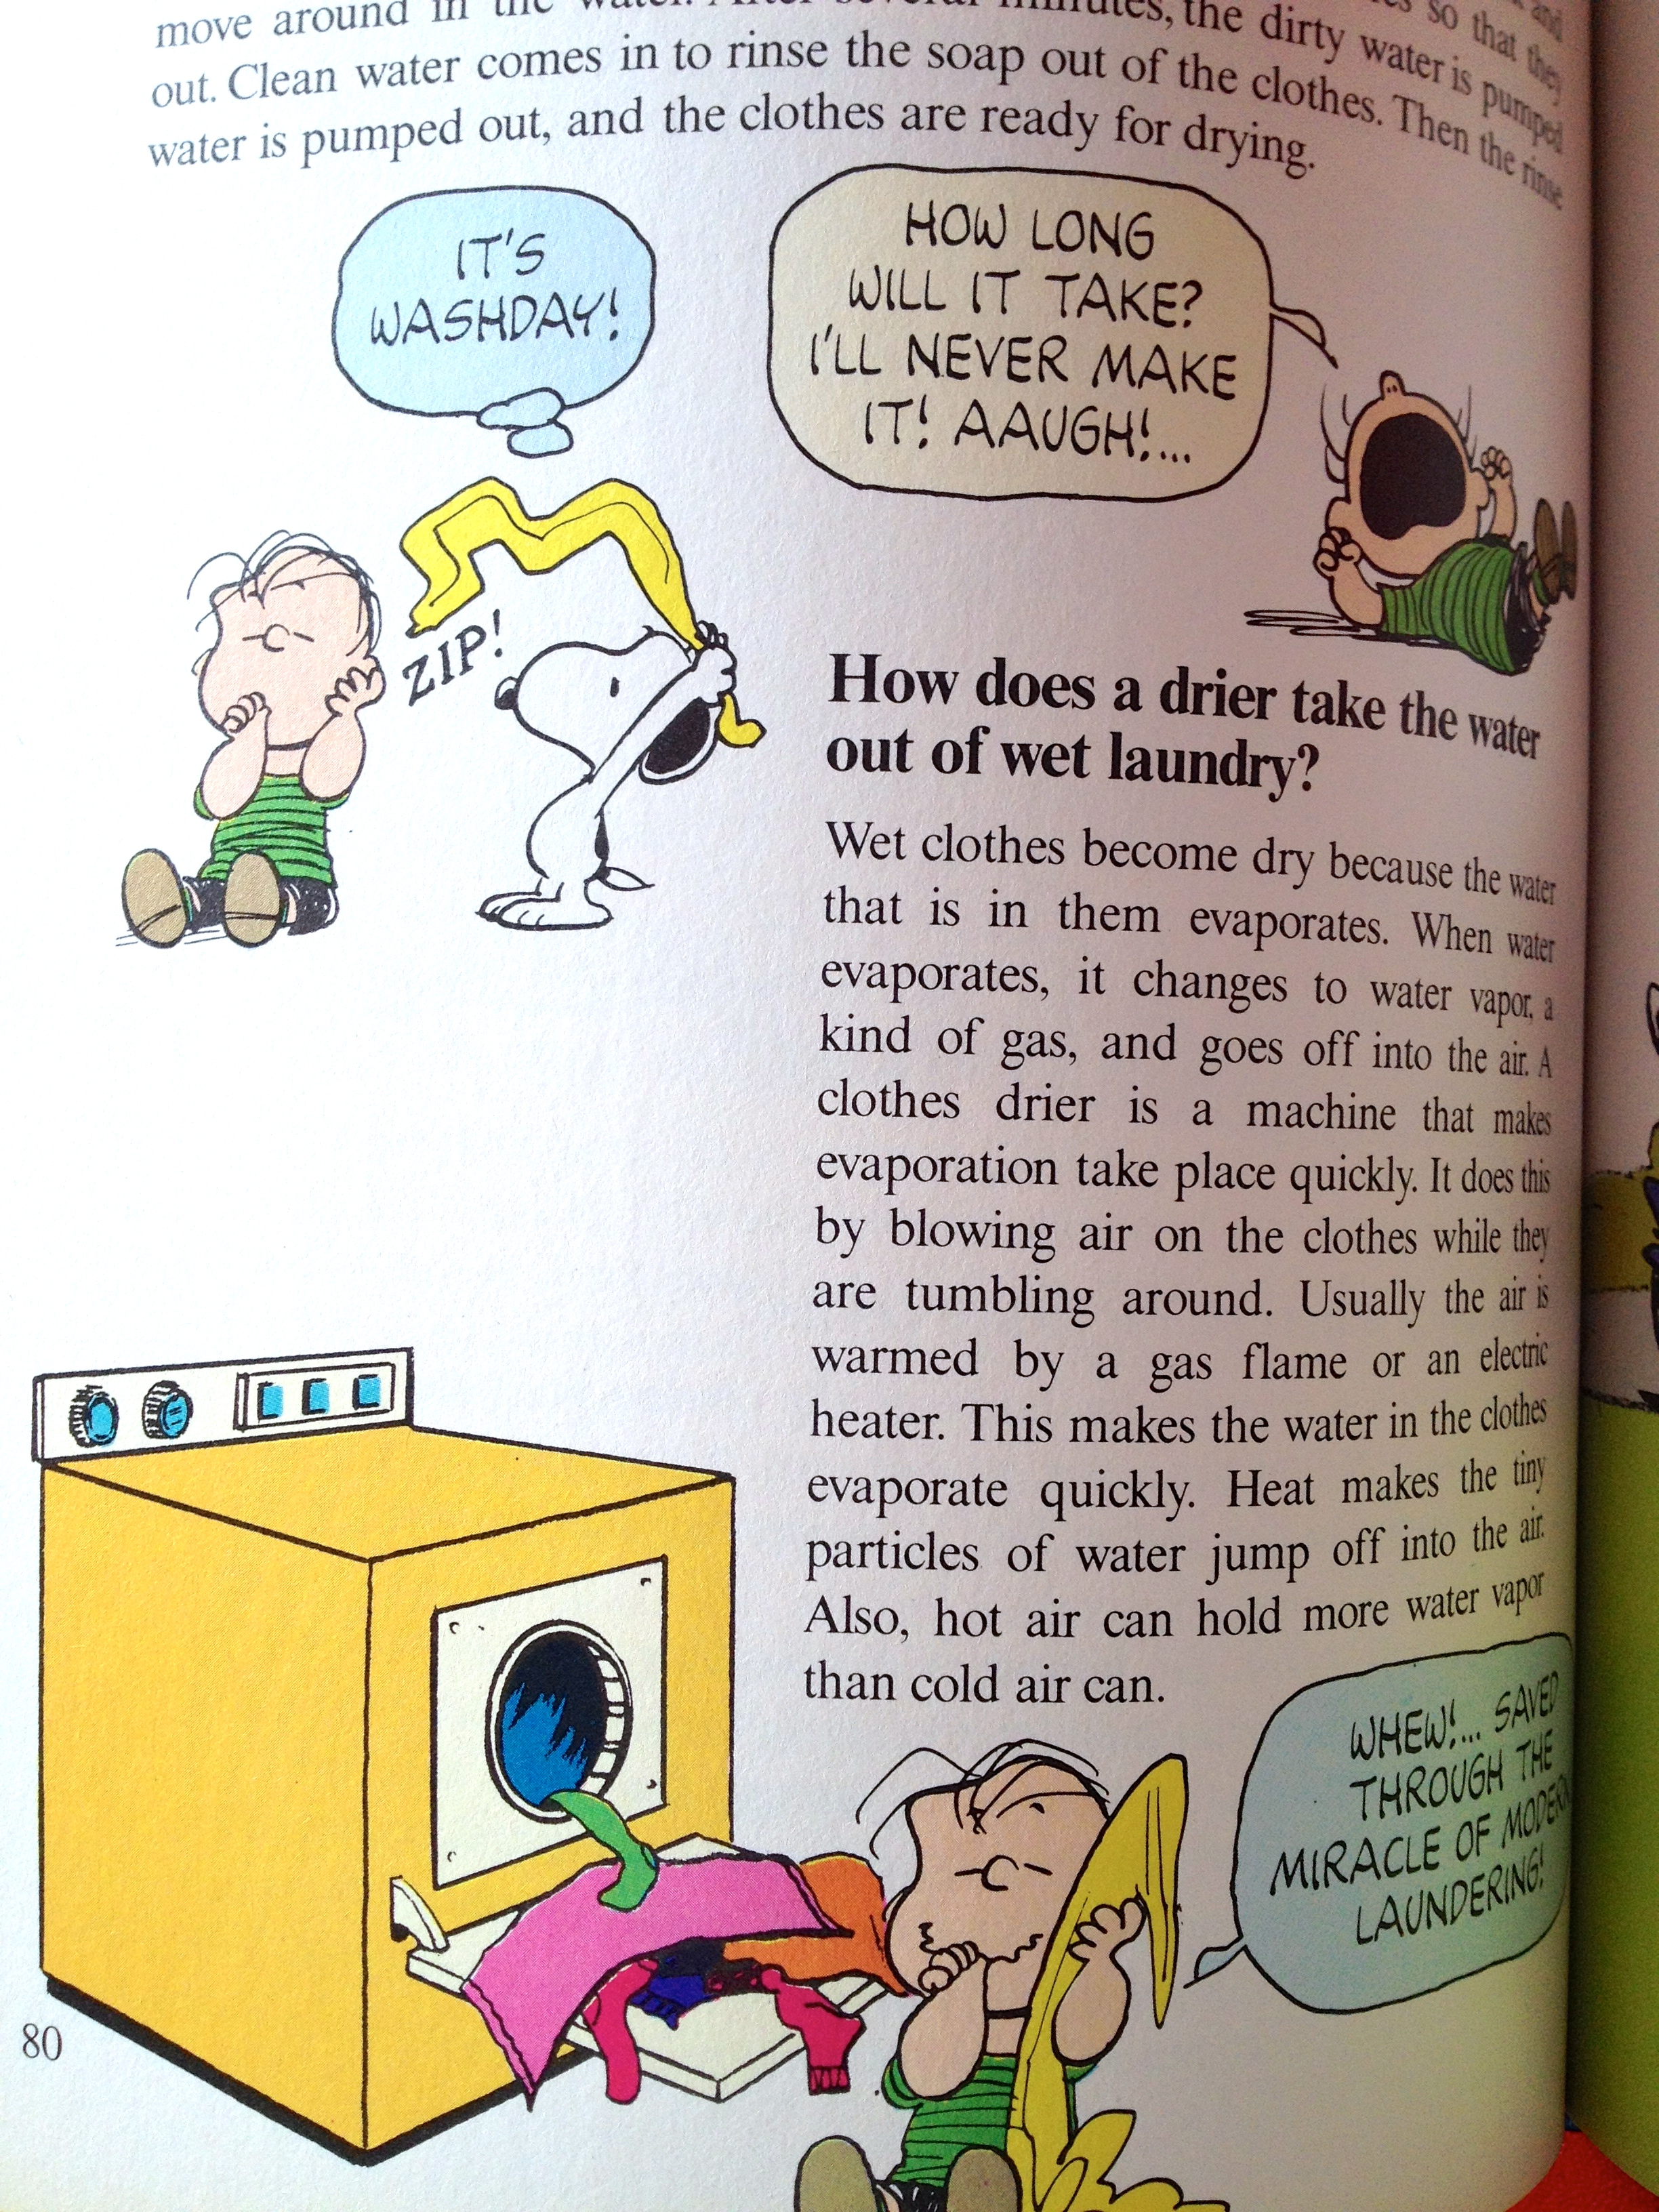 from "Charlie Brown's Fifth Super Book of Q&A", p.80